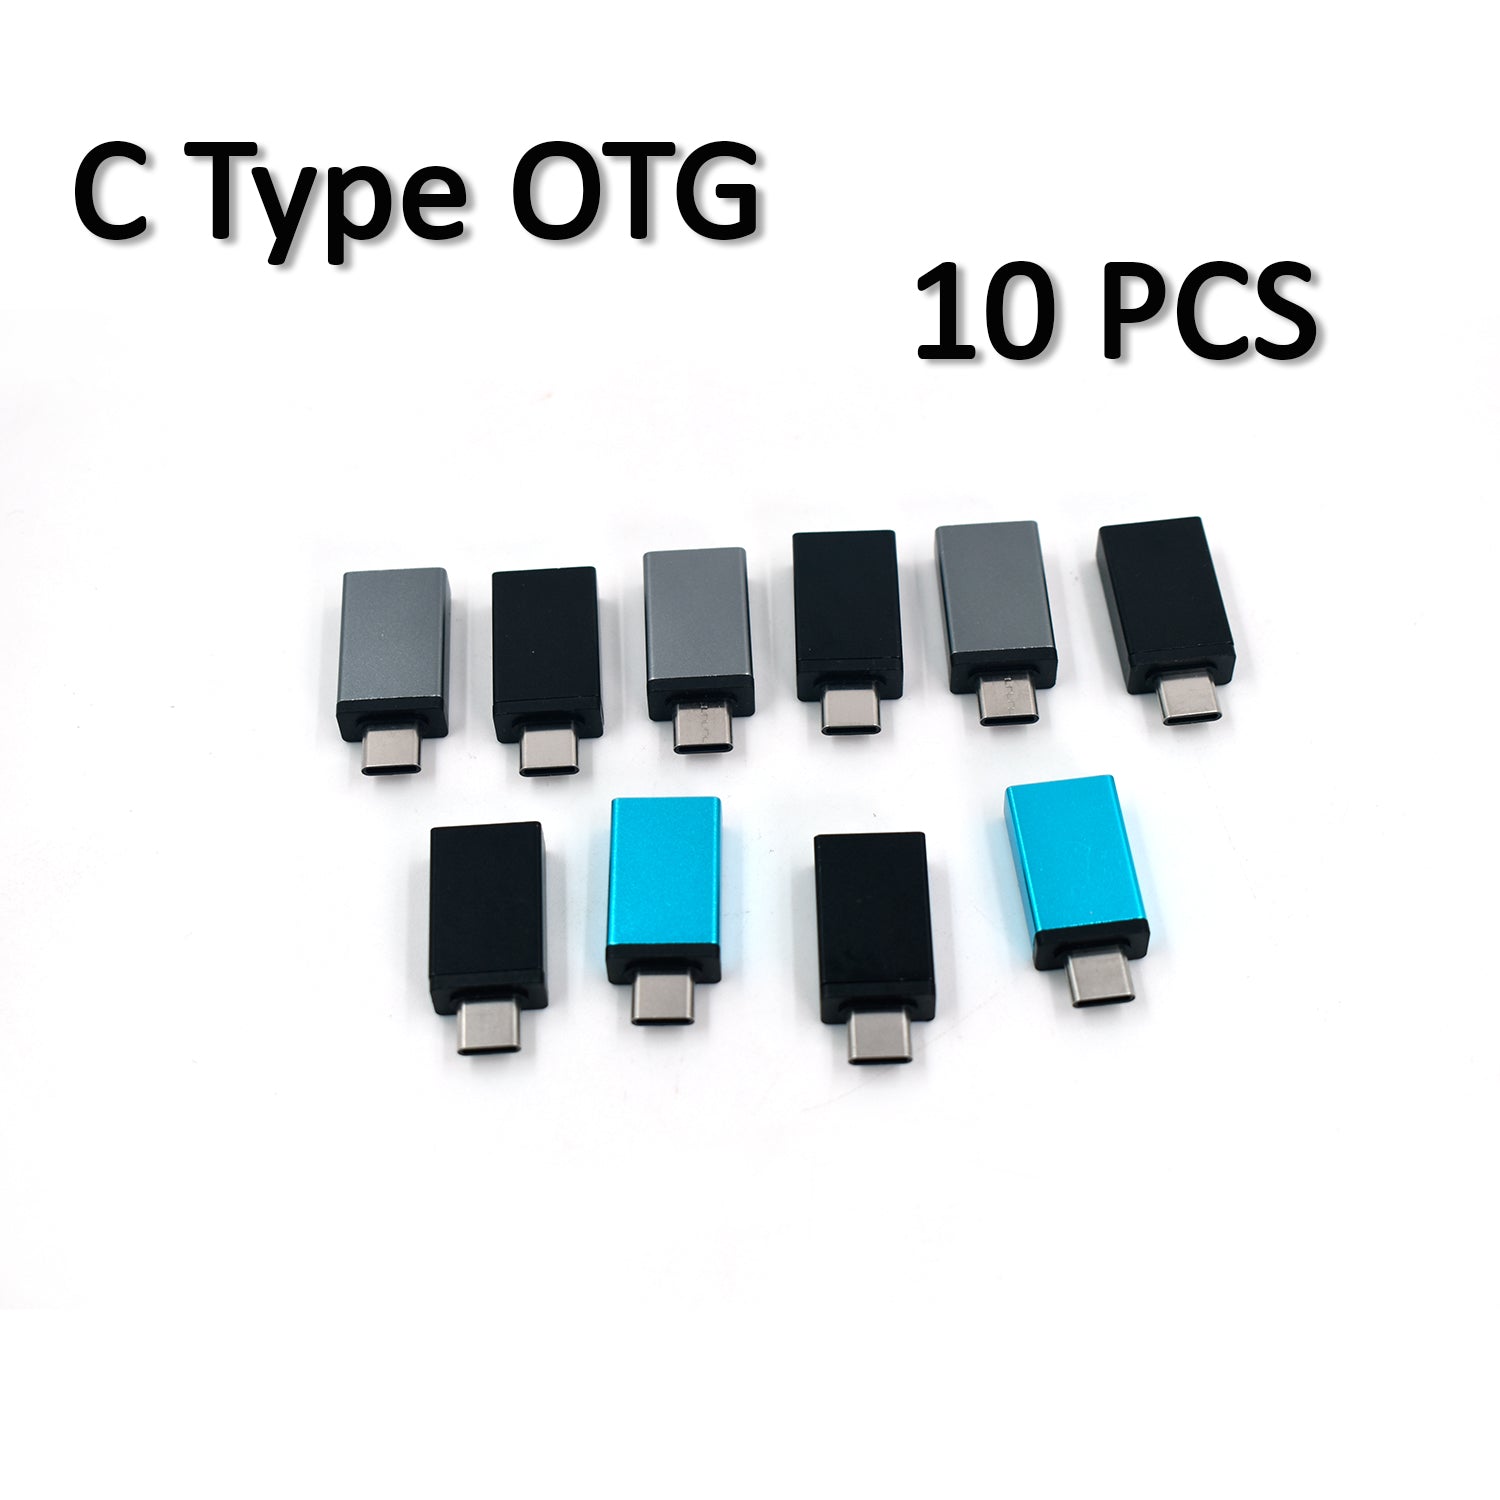 0261 OTG Type C & USB to Micro USB Adapter for Android Mobile Smart Phones & Tablets With Zip Pouch (Pack of 20) 